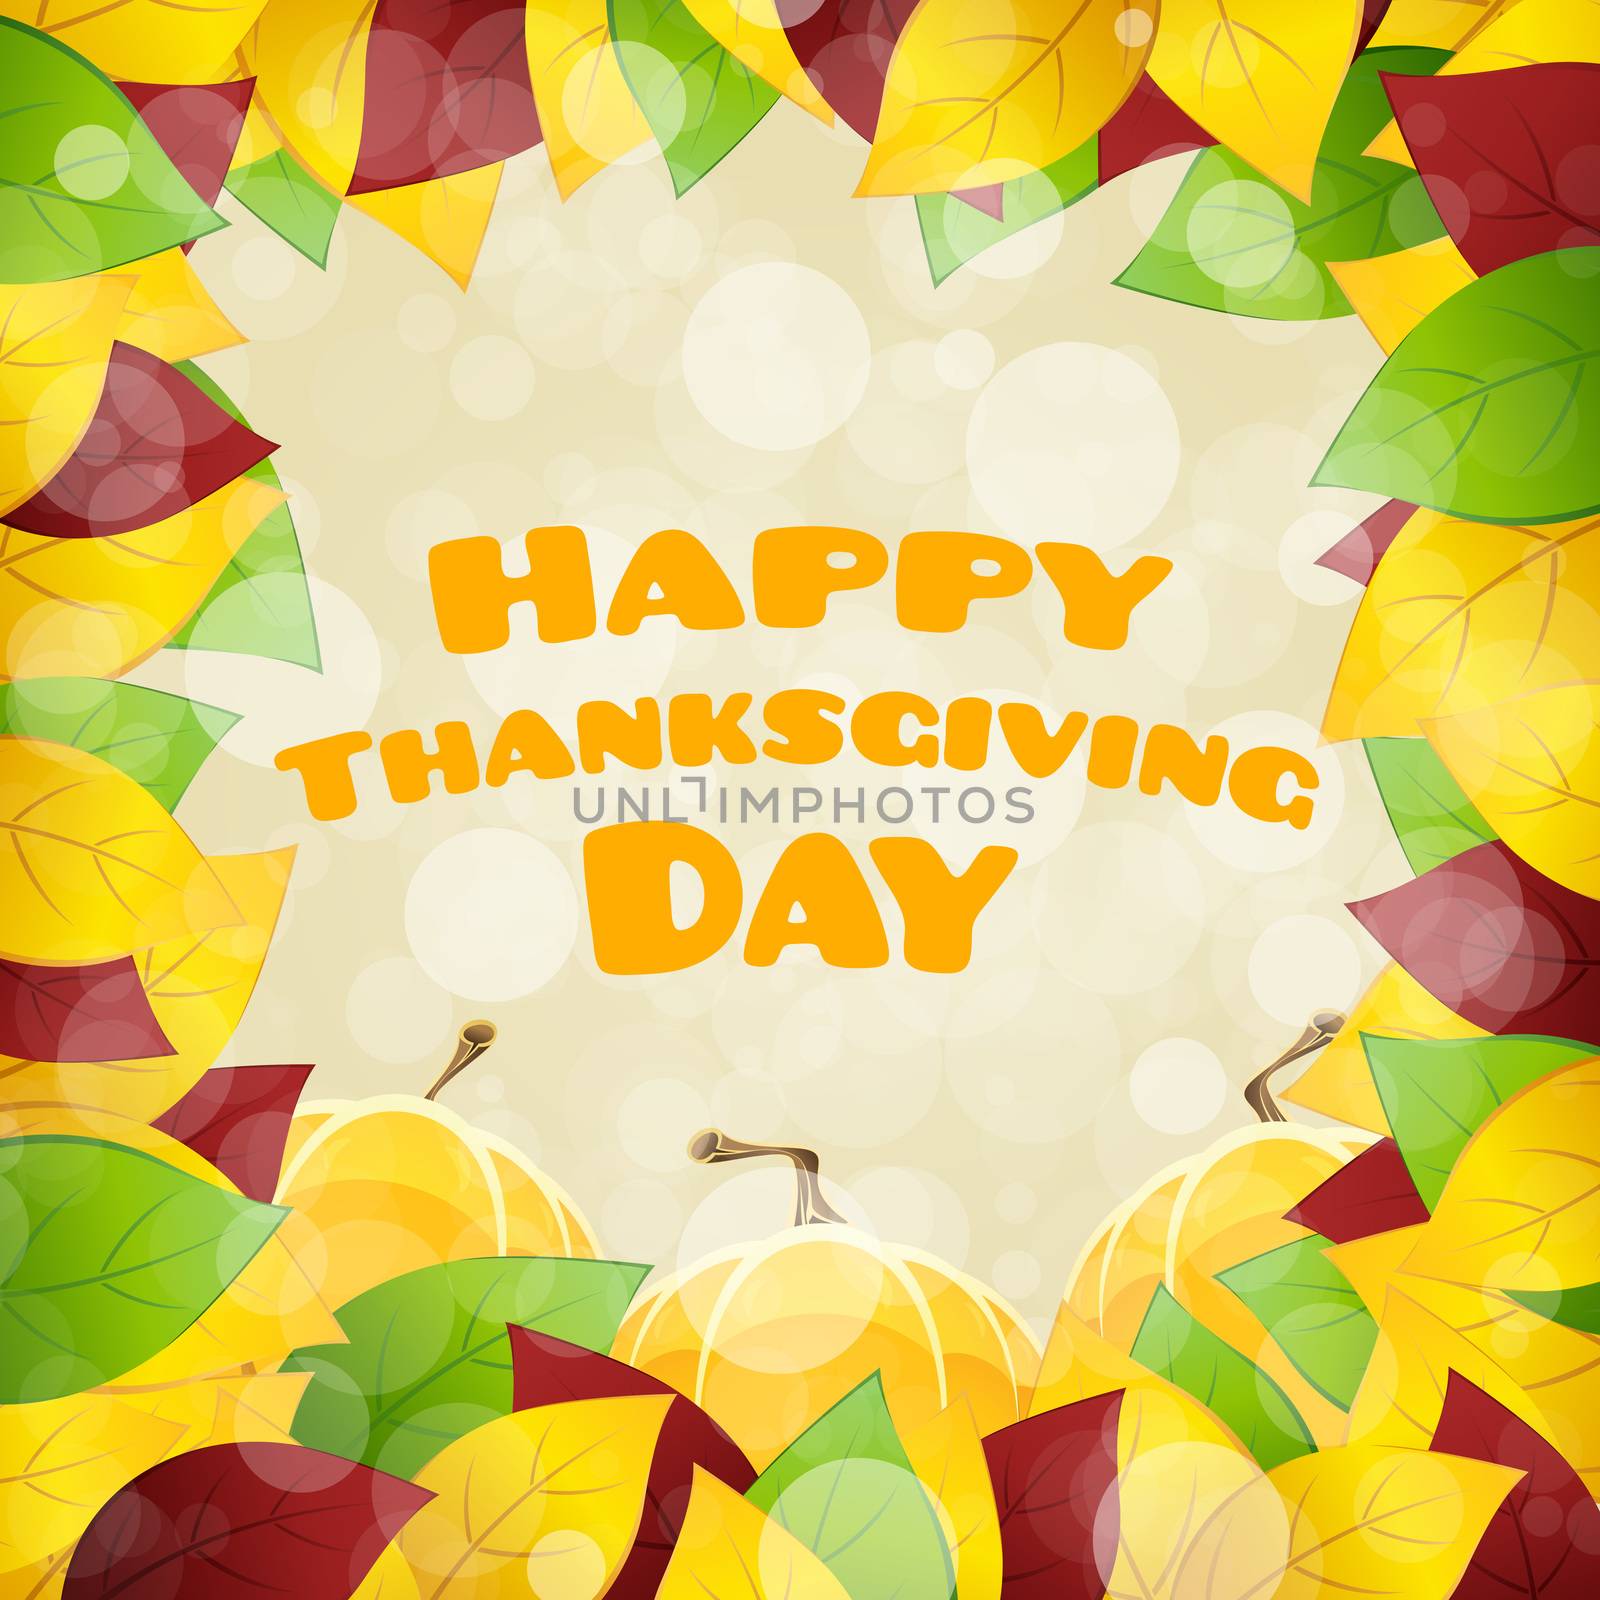 Happy Thanksgiving Day card by WaD